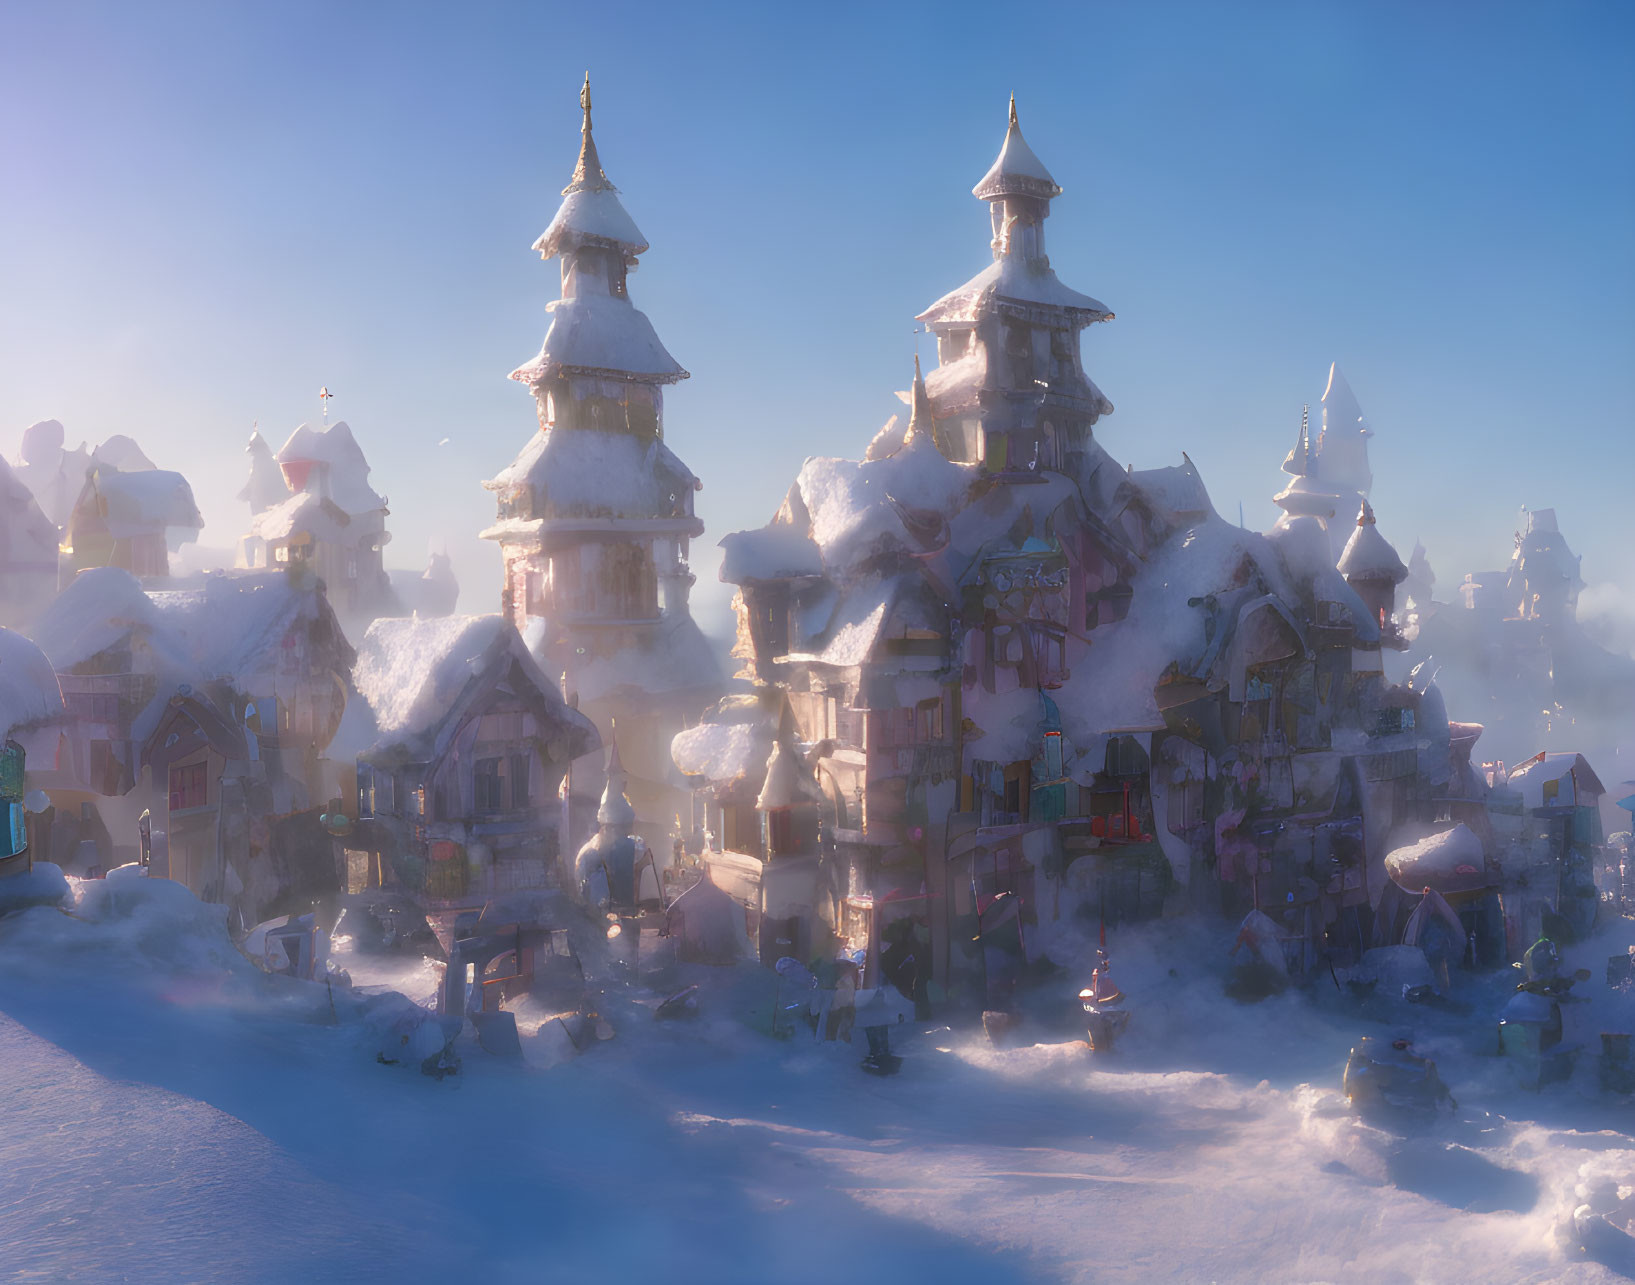 Snow-covered village with quaint buildings and towering spires in soft mist.